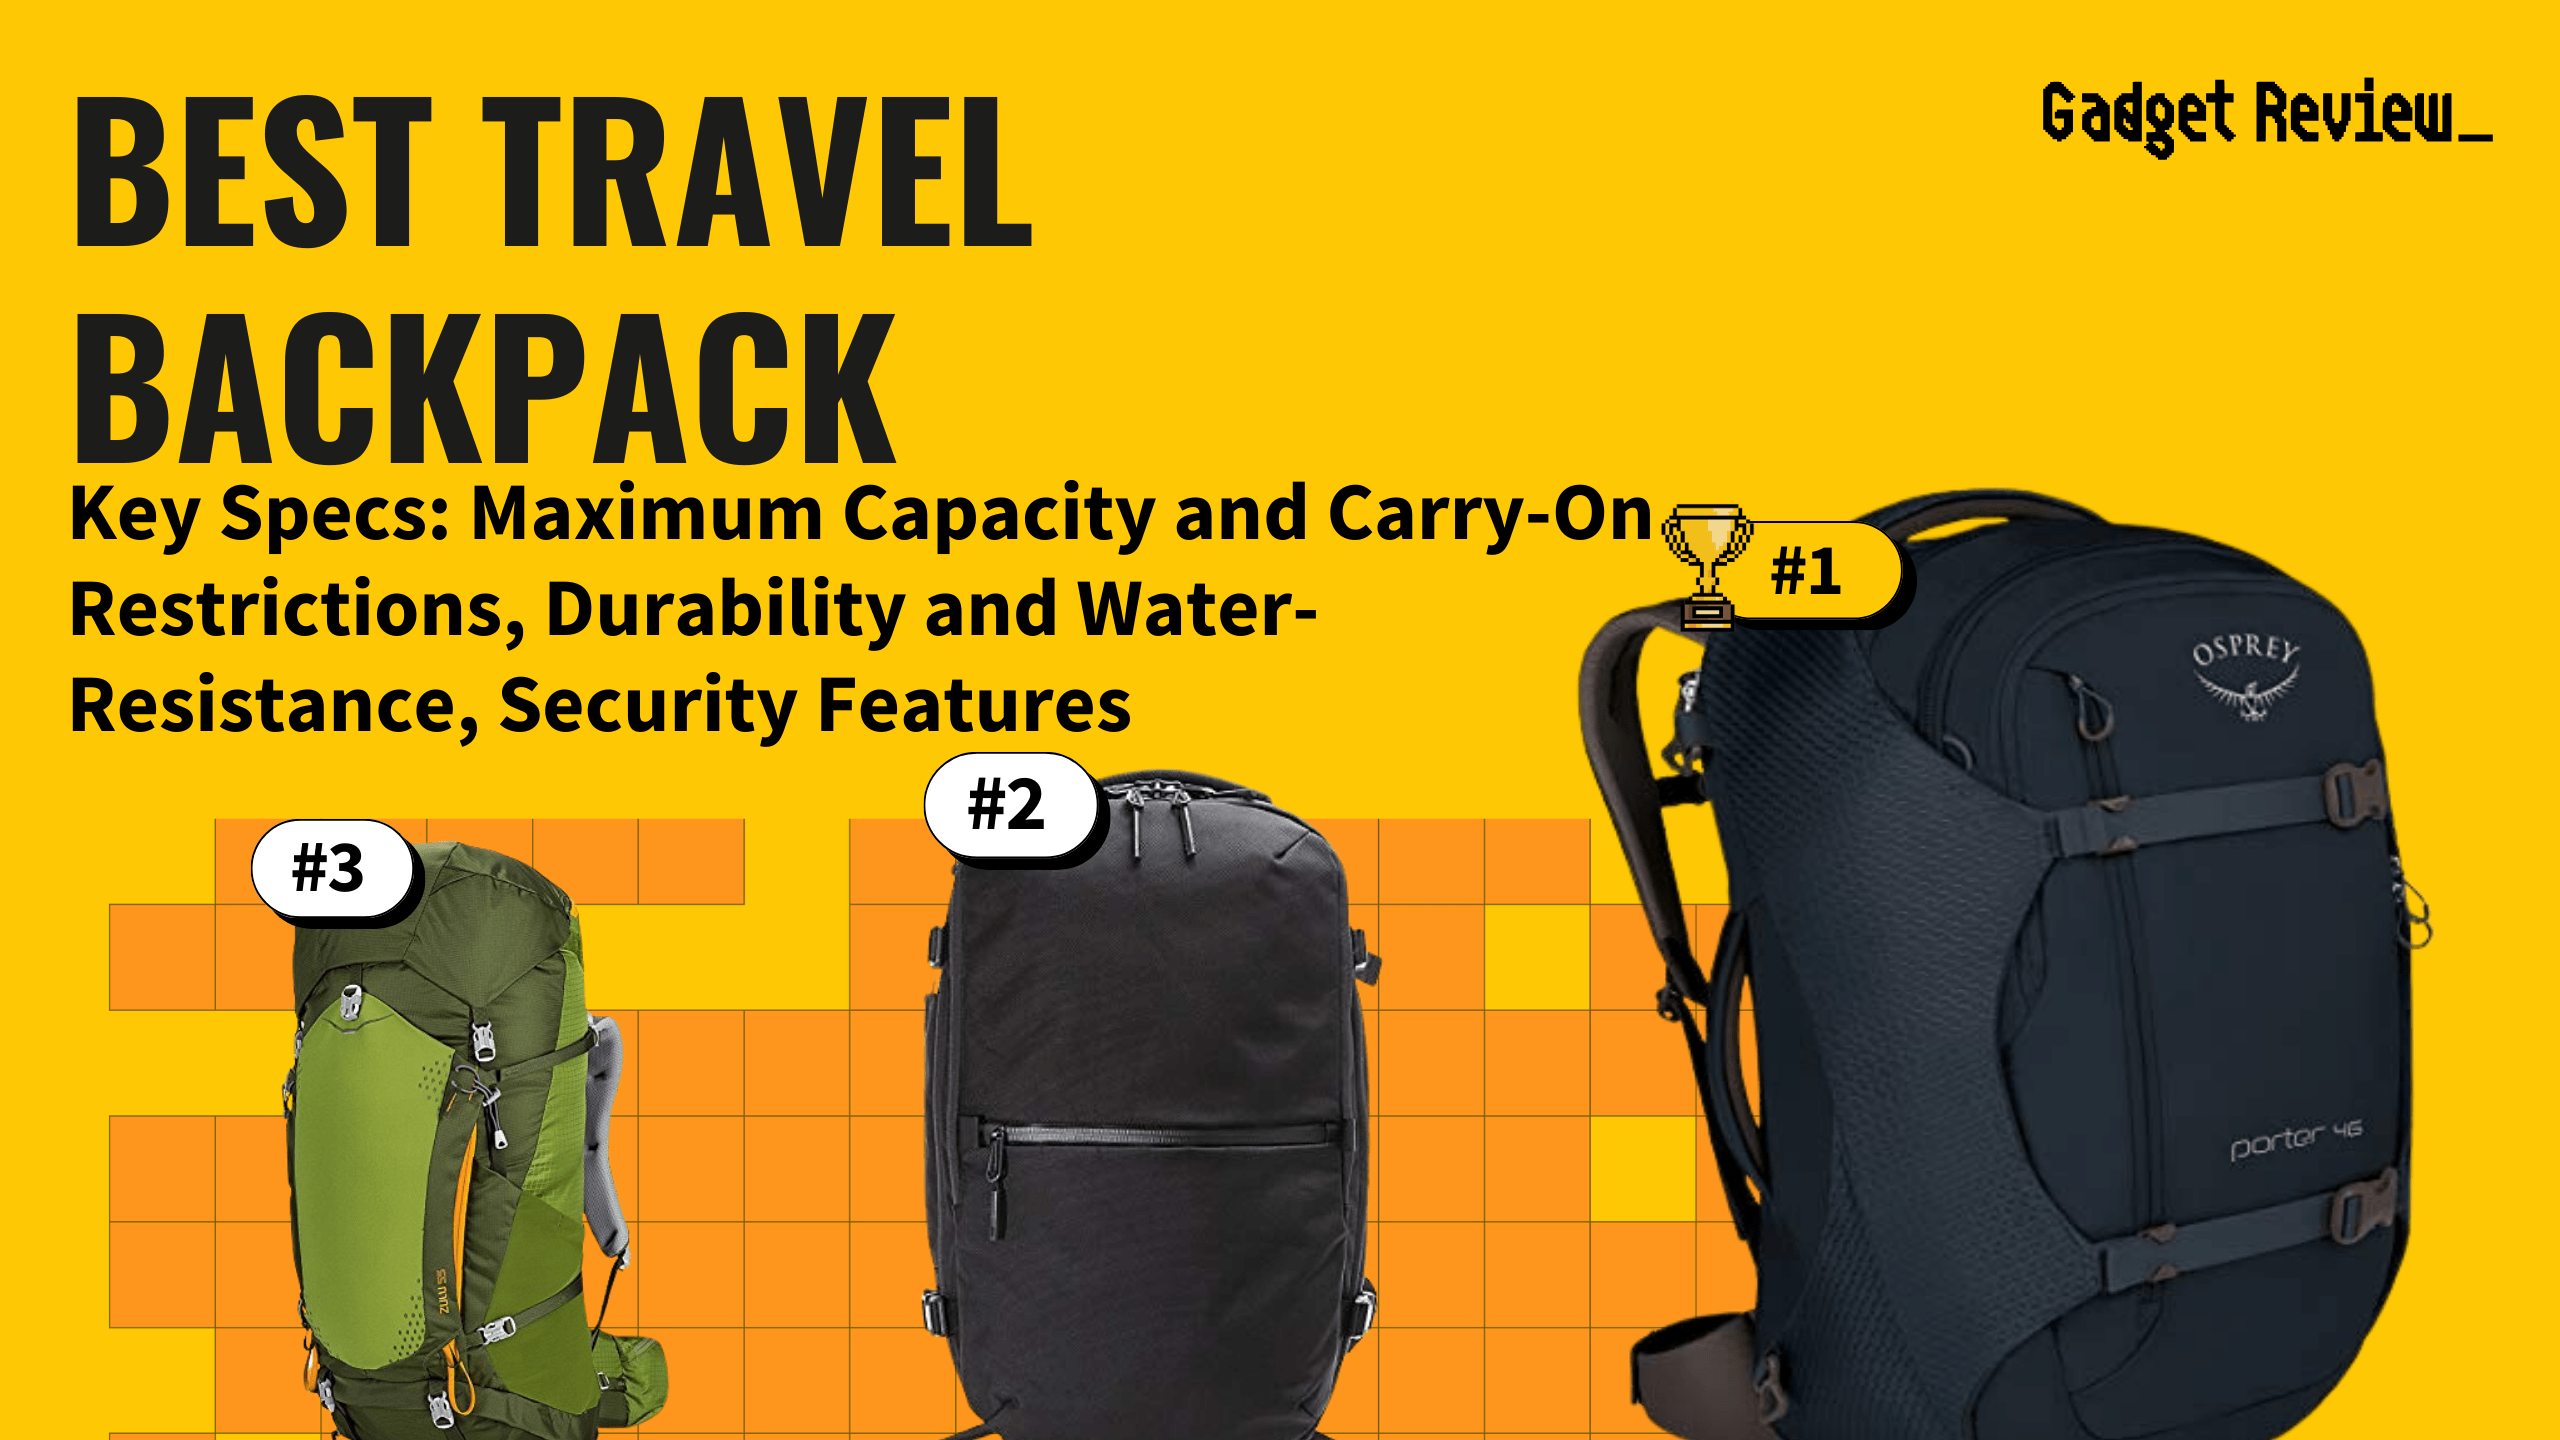 best travel backpack featured image that shows the top three best bag models